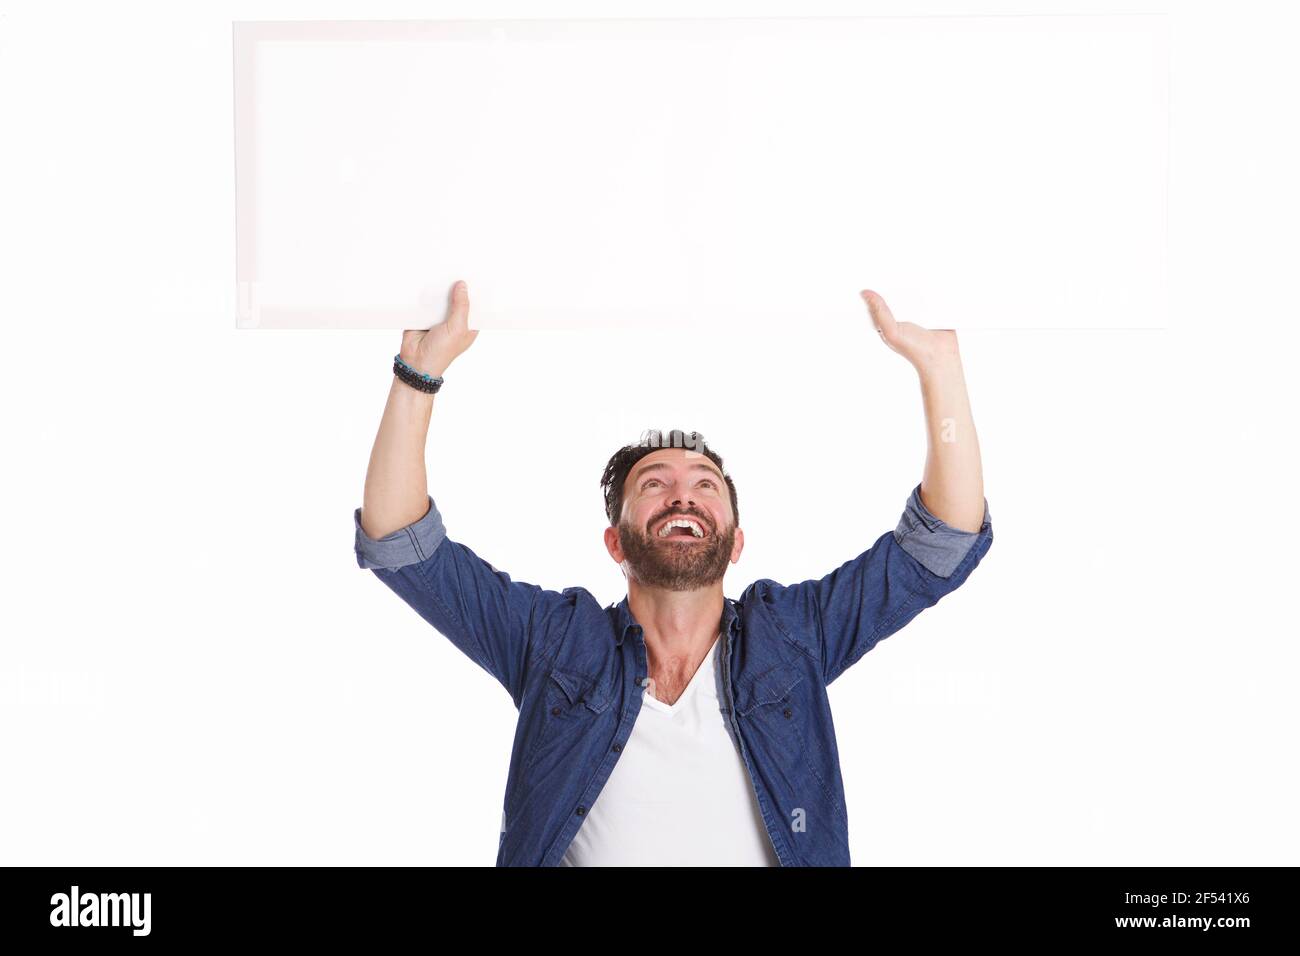 Portrait of mature man laughing and holding blank poster sign on white background Stock Photo